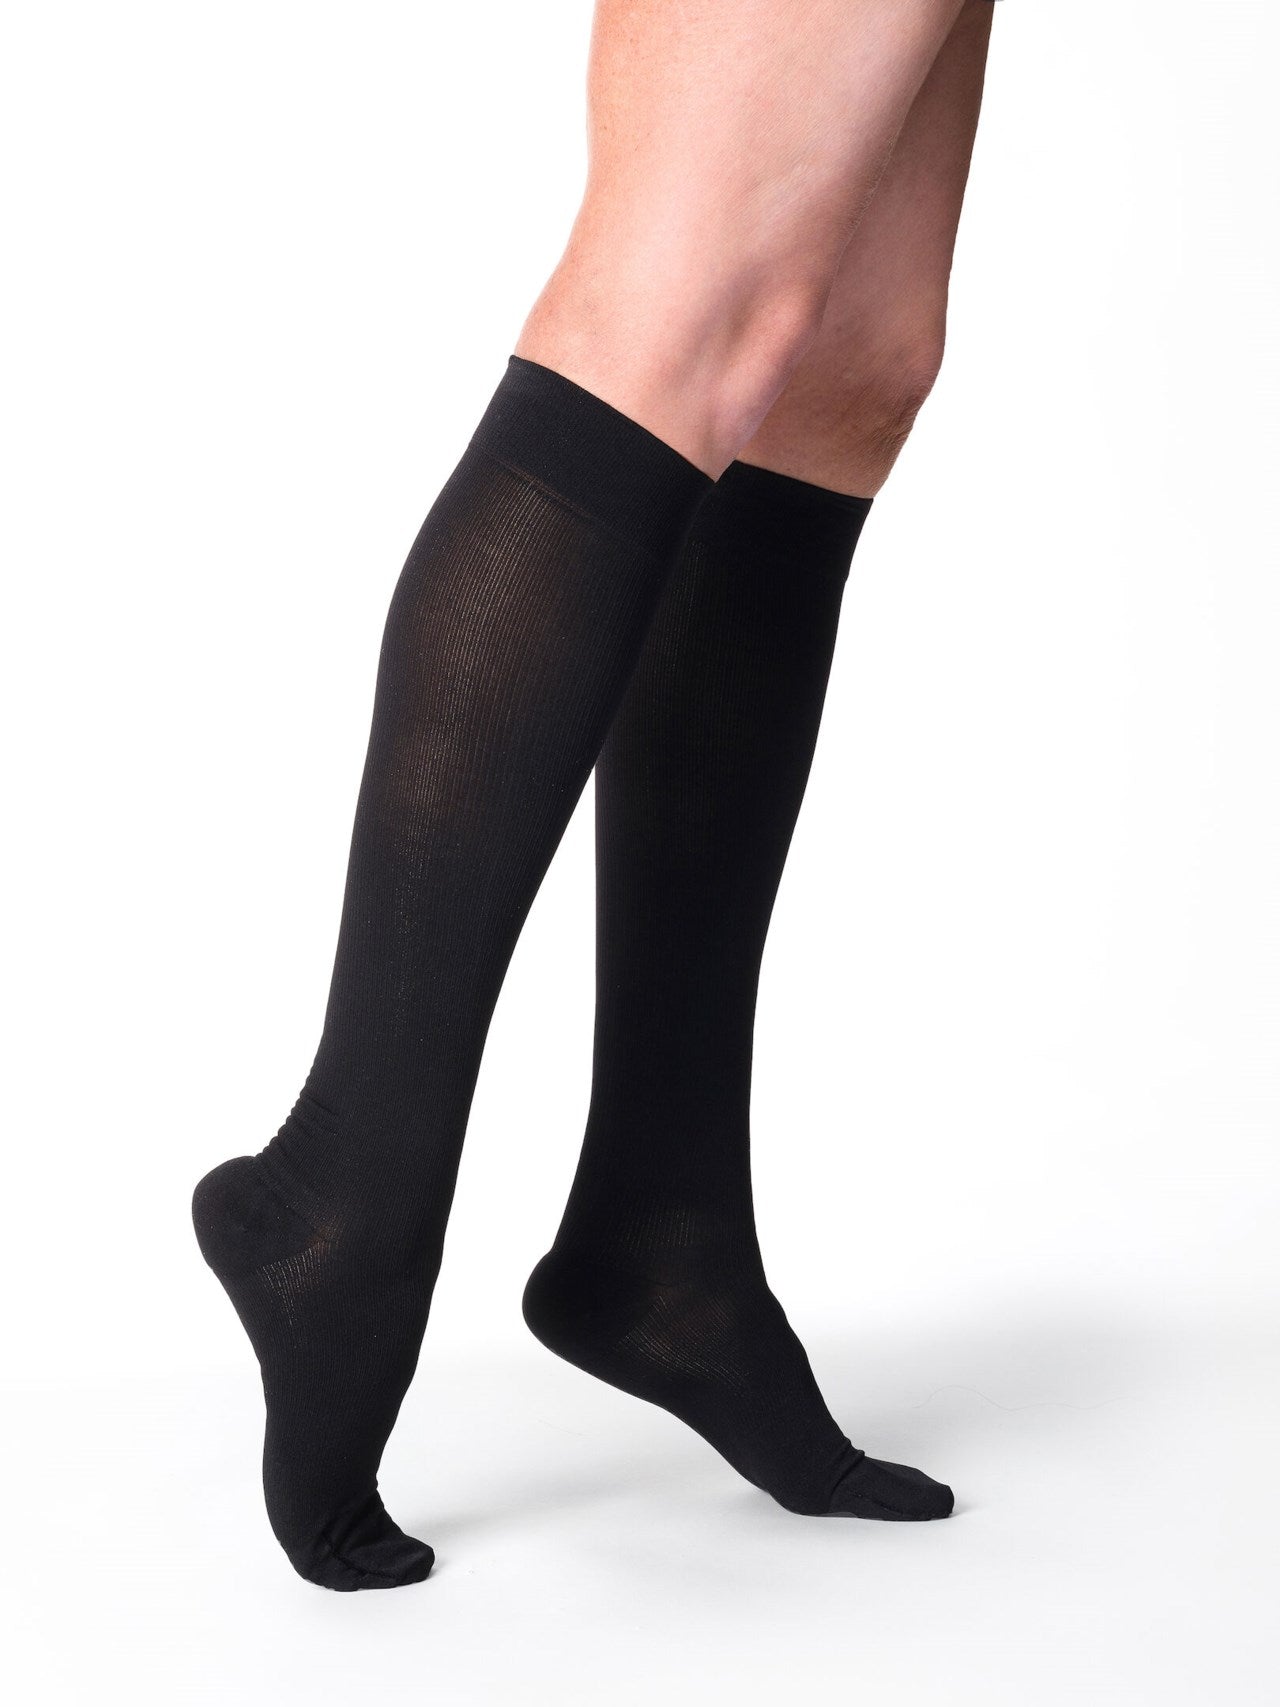 Sigvaris 230 Essential Cotton 20-30 mmHg Compression Socks Thigh High for Men Closed Toe